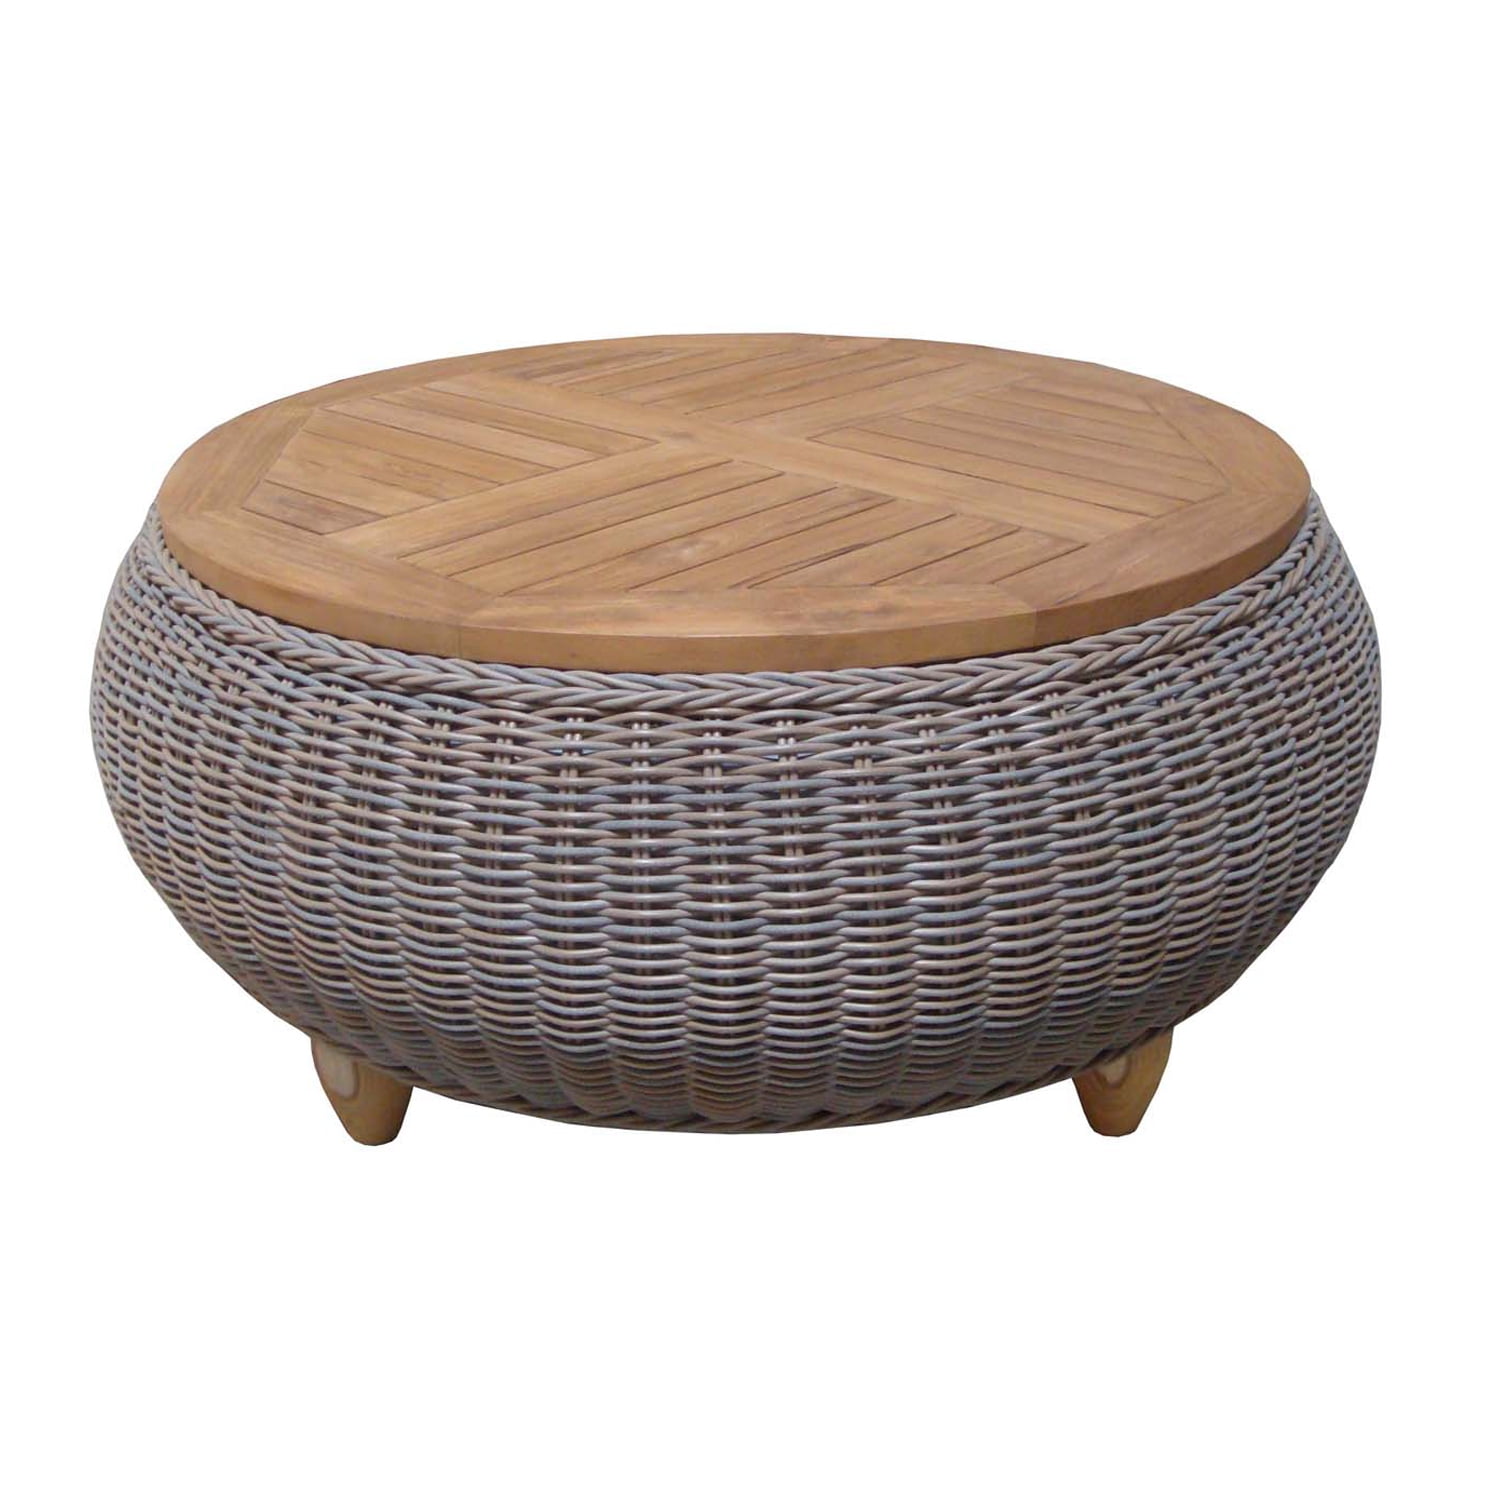 Padma's Plantation Outdoor Paradise Ottoman With Wood Top